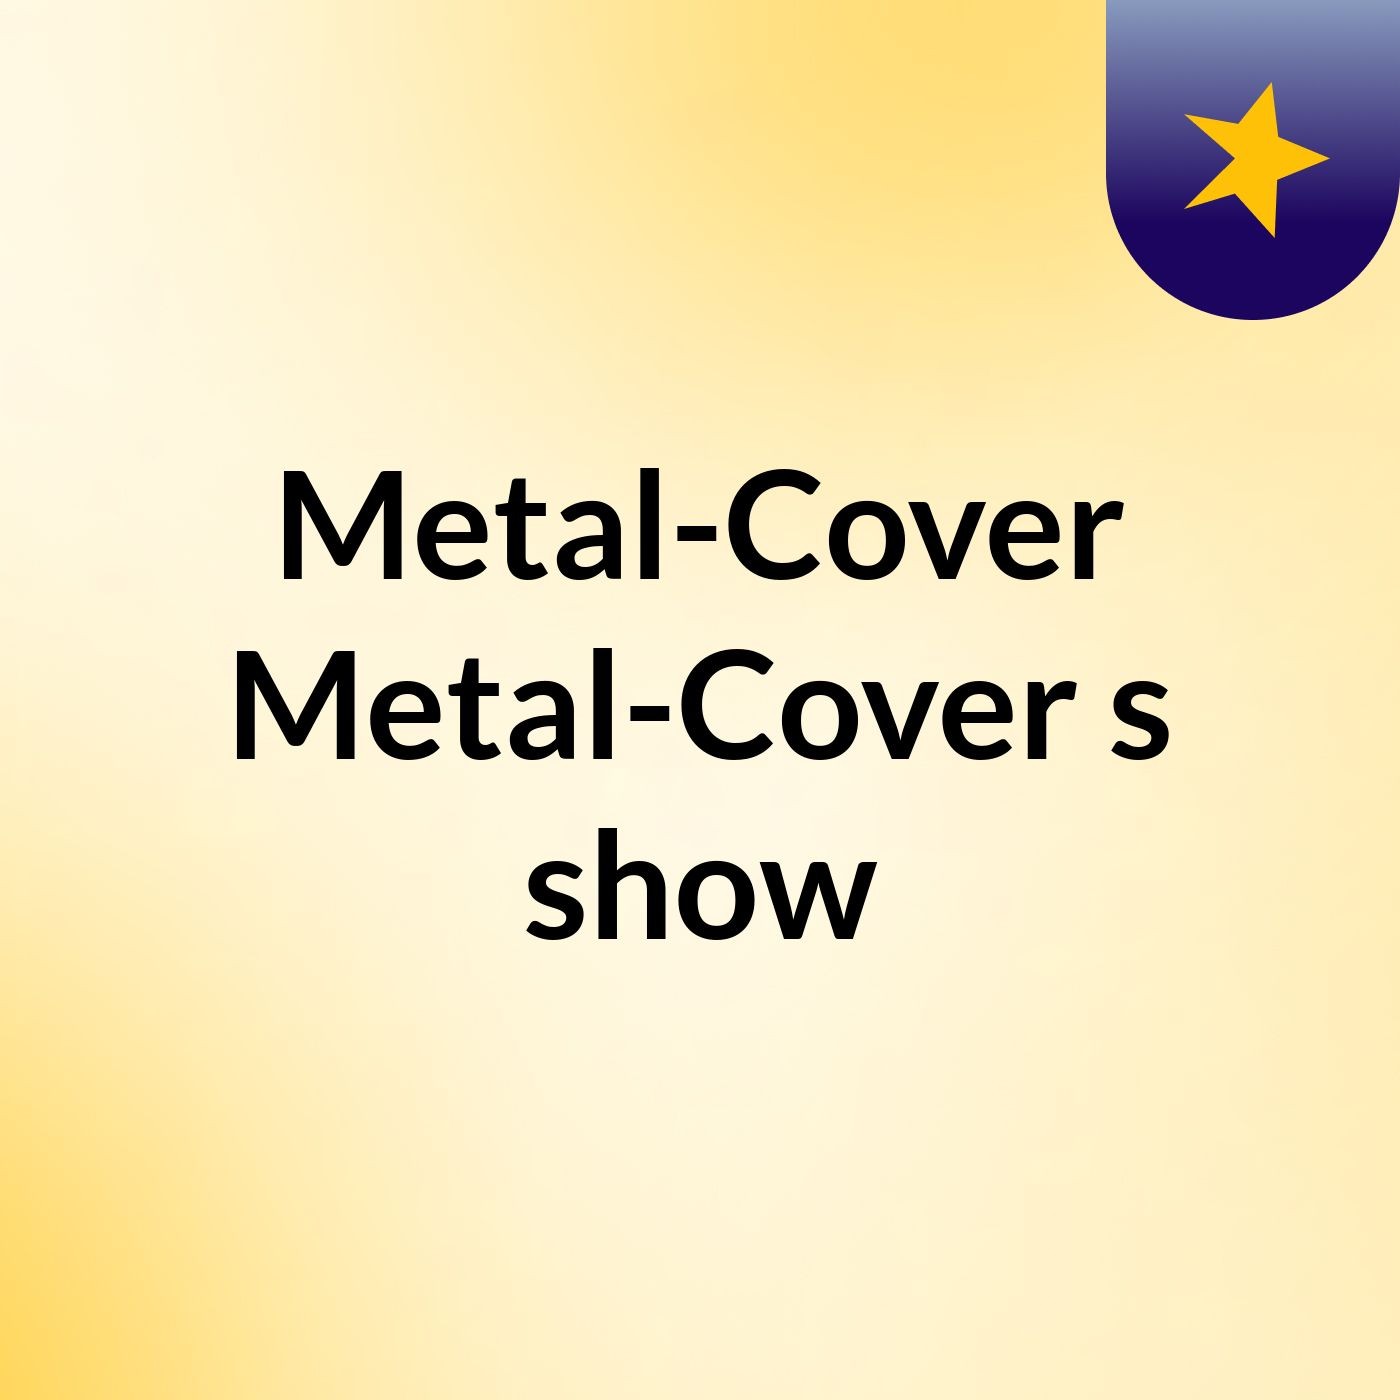 Metal-Cover Metal-Cover's show